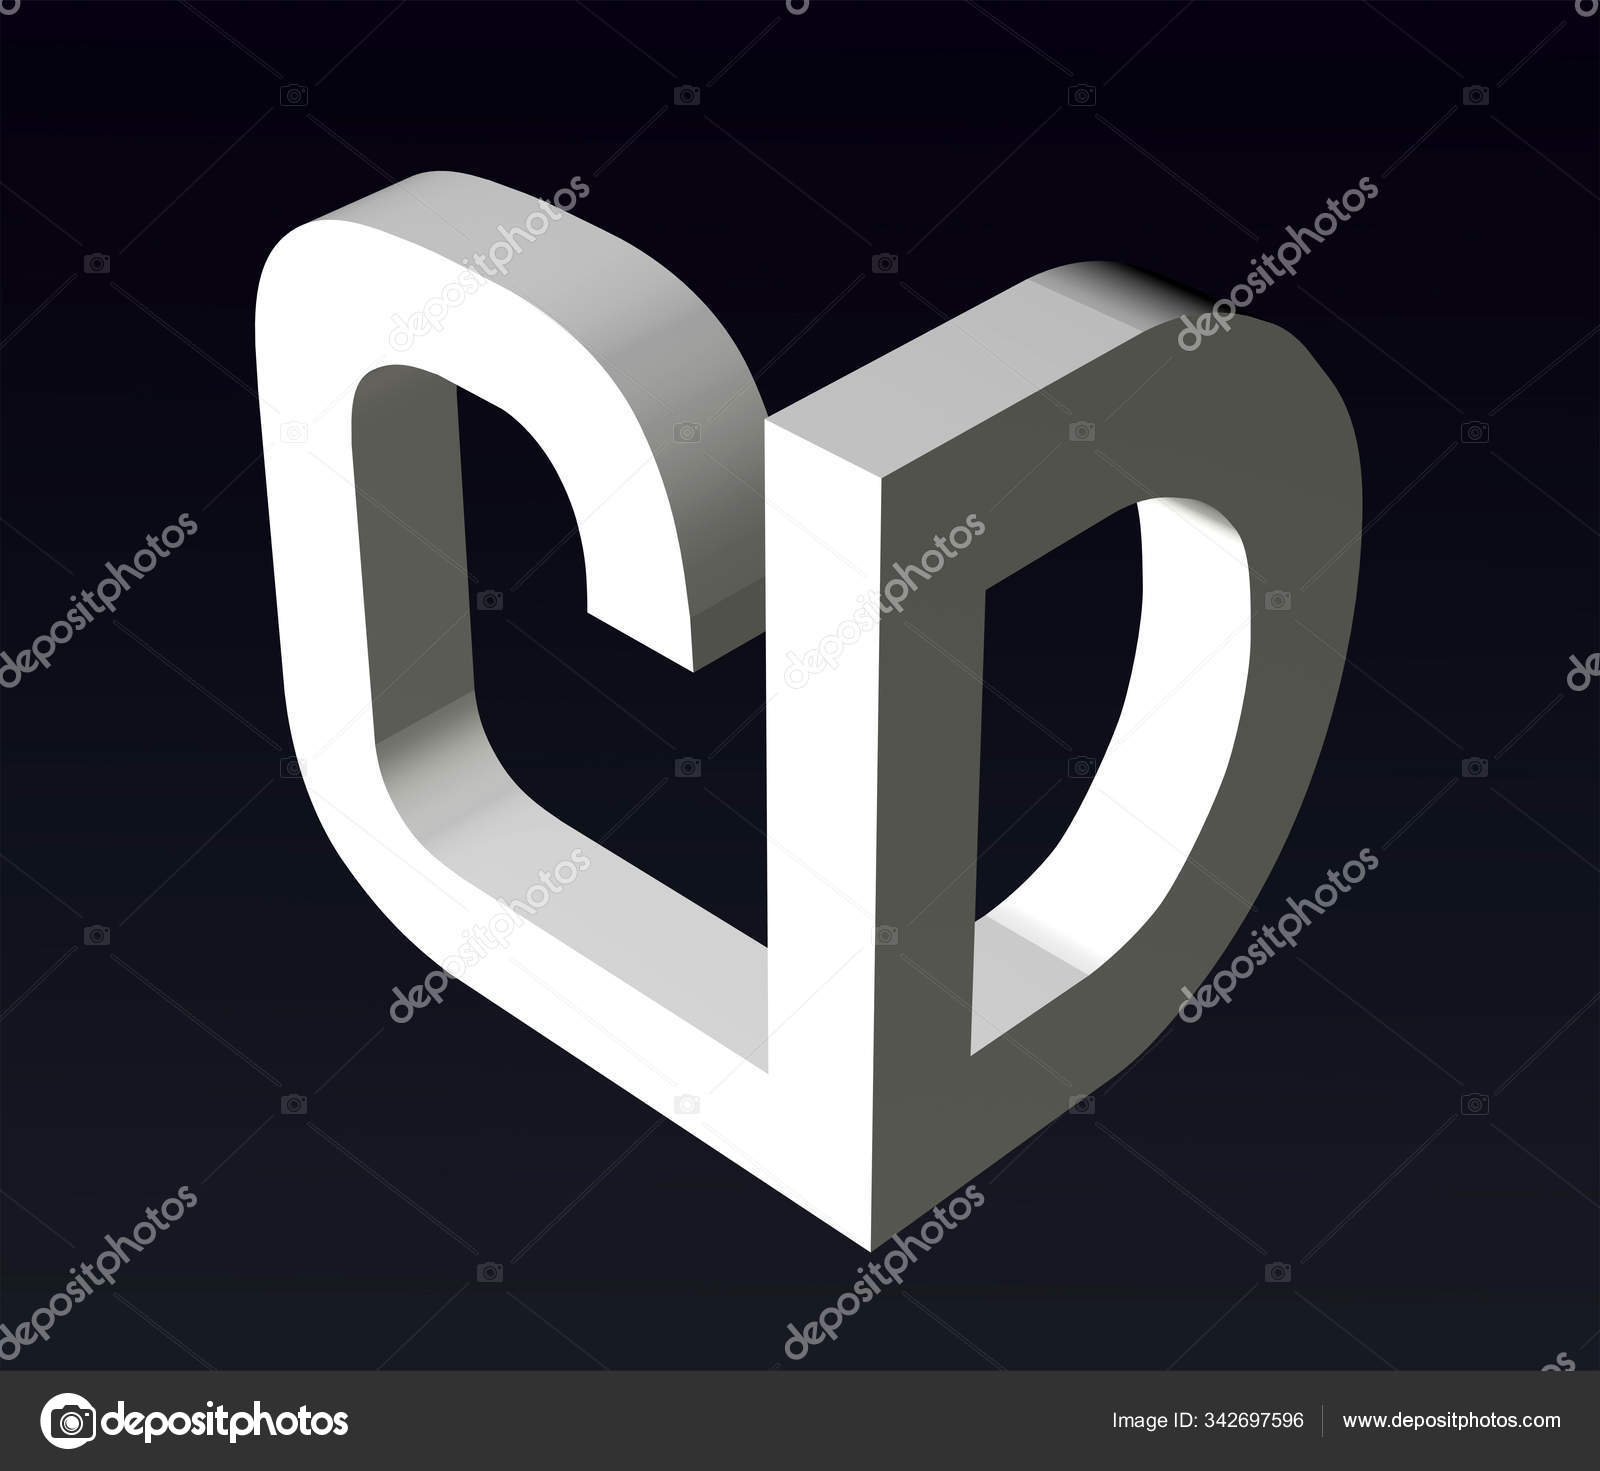 Font Stylization Letters Font Composition Logo Visualization Stock Photo Image By C 0123omar